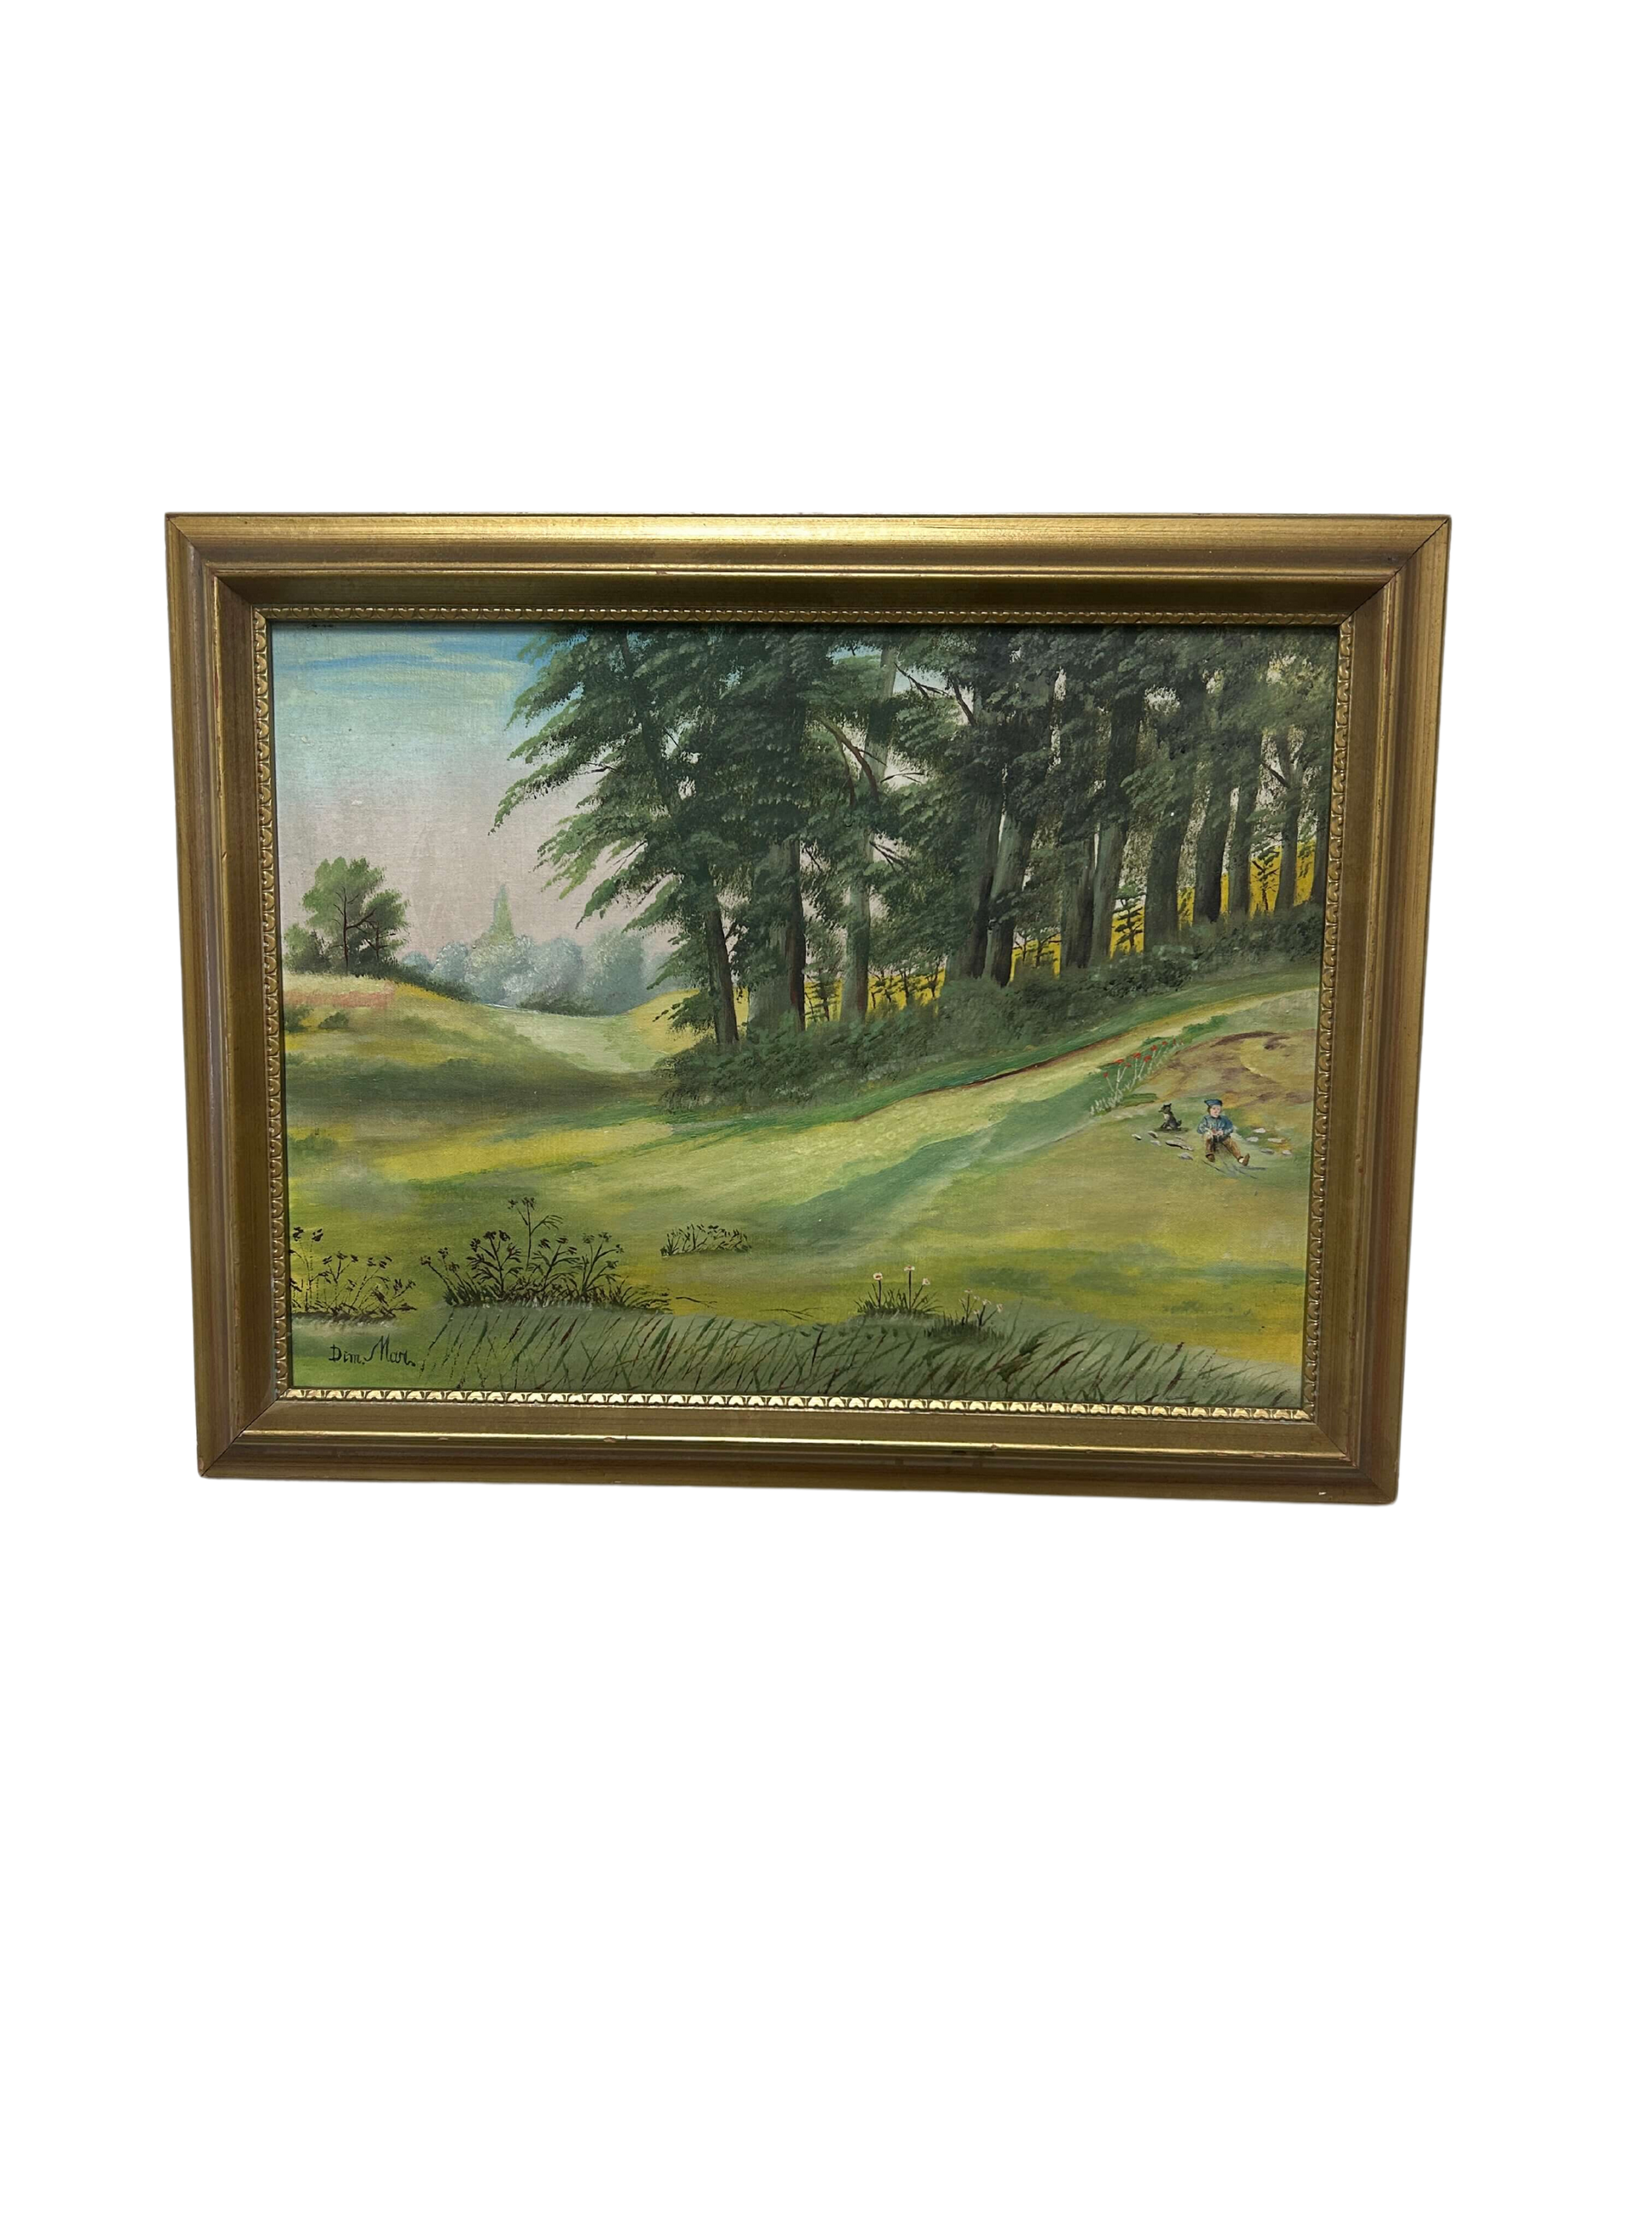 This painting masterfully depicts nature's lush splendor, with the resilient tree symbolizing tranquility and our bond to the earth. Encased in a refined frame, it stands as a tribute to art's power to evoke environmental reverence. Available at the hearing clinic at Allard Audiology.